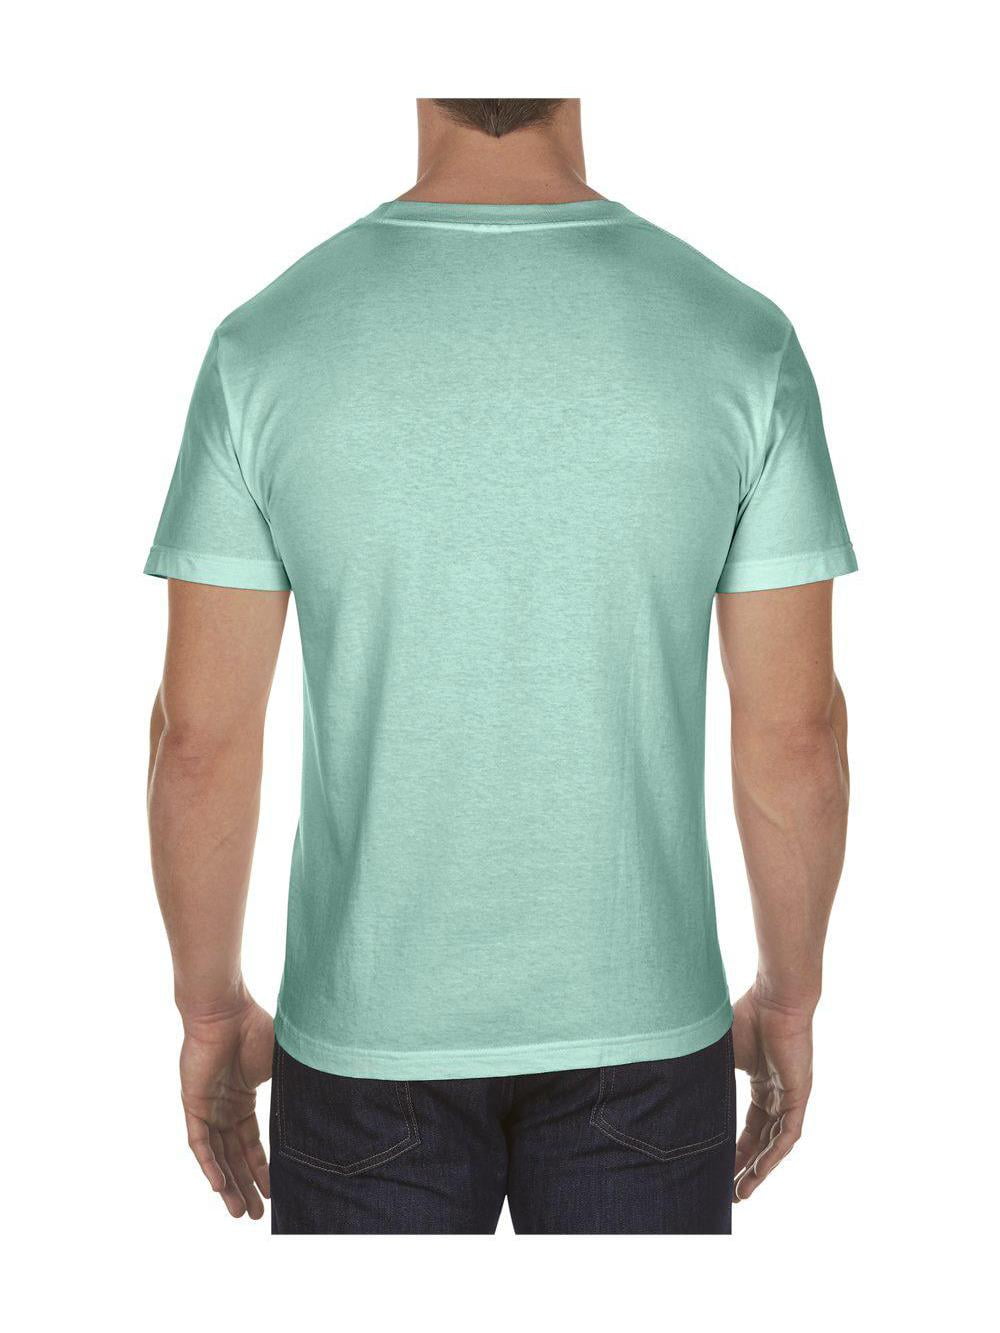 ALSTYLE Classic T-Shirt 1301 Green S Forest